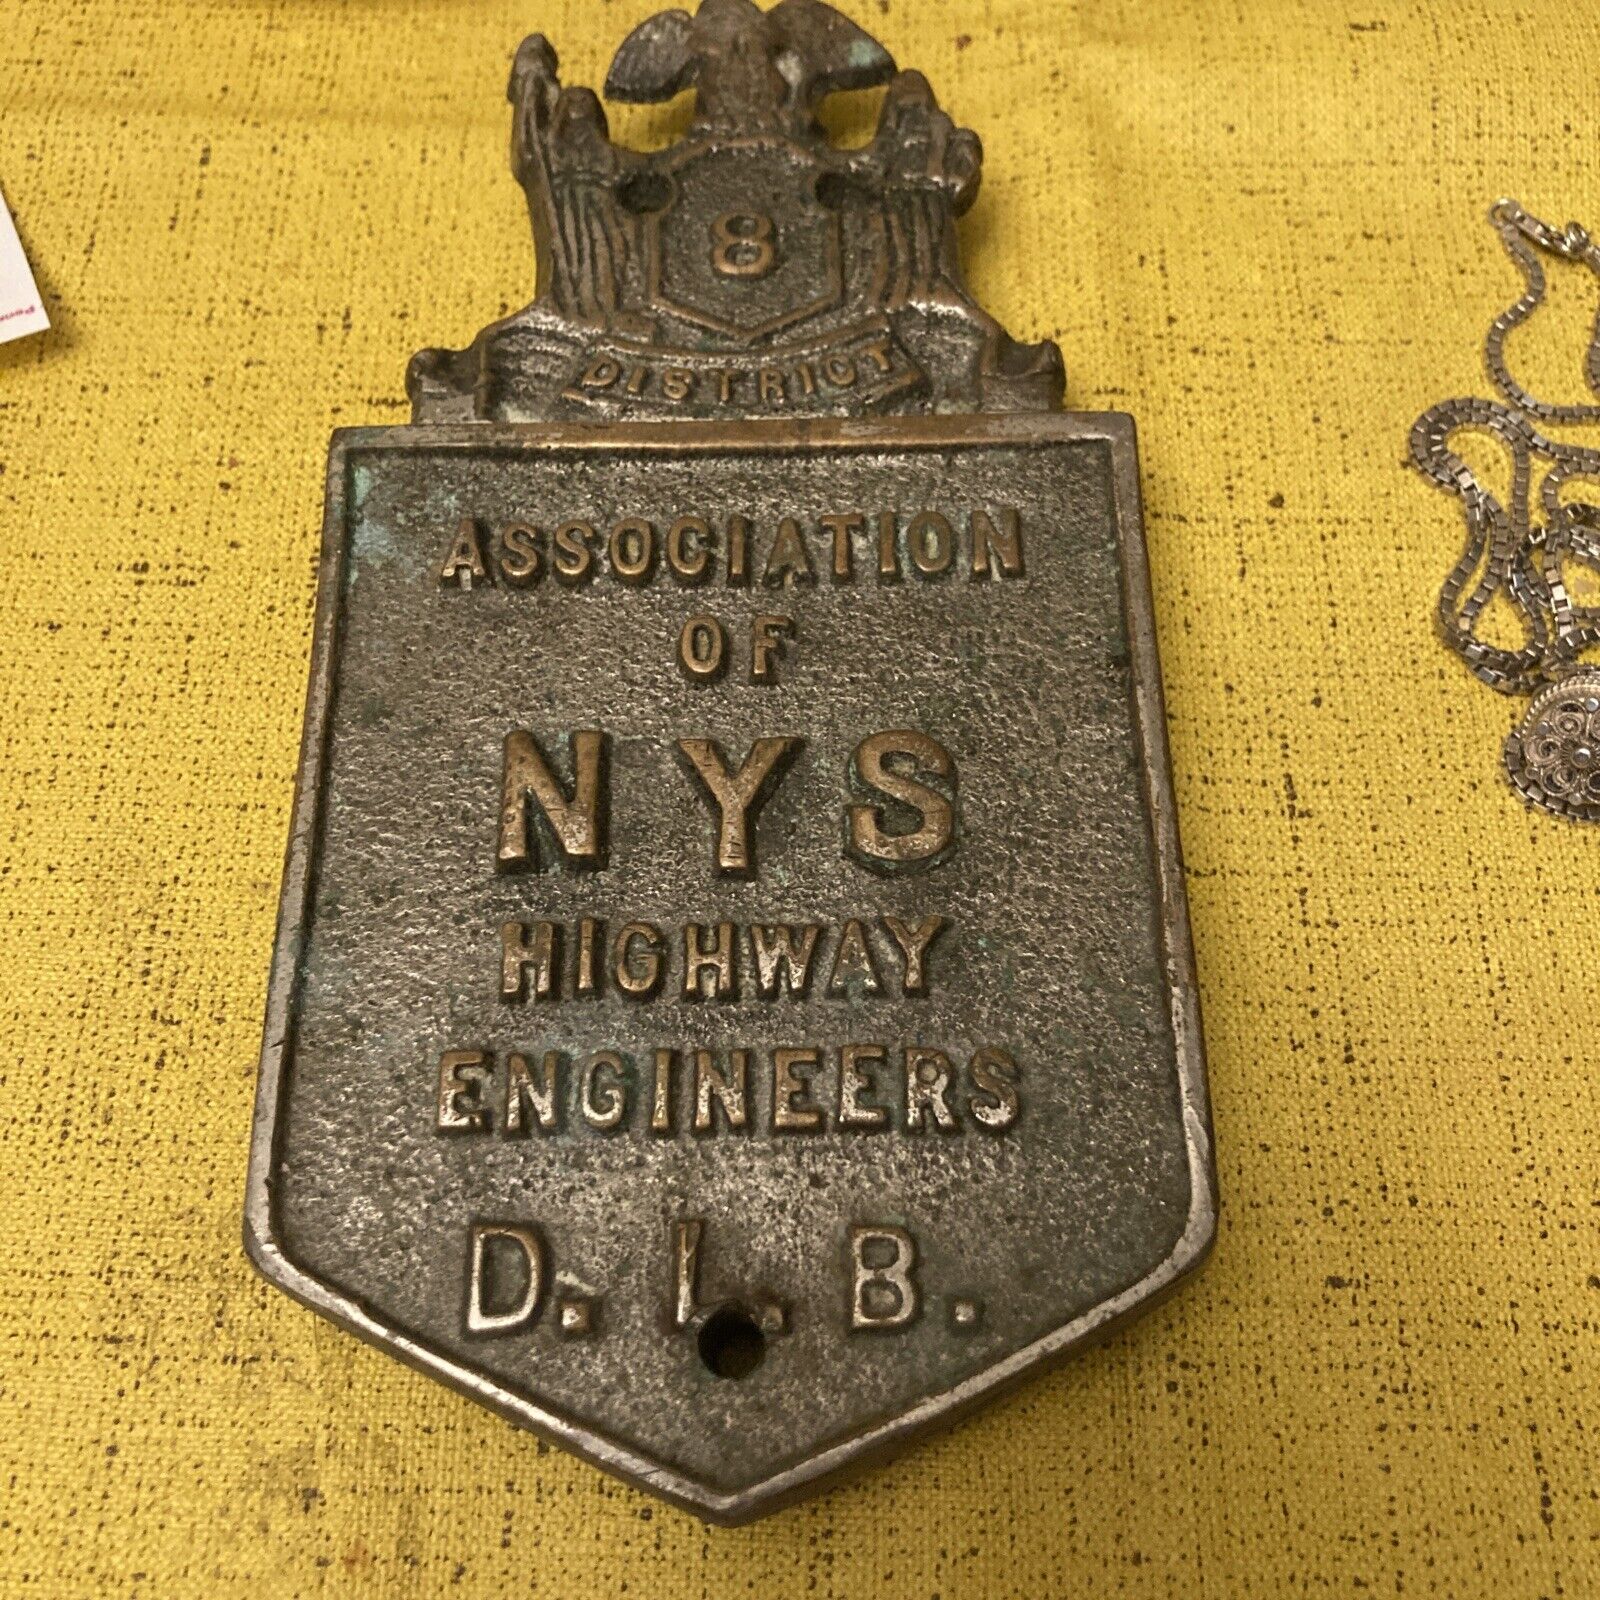 Antique Cast Bronze Plaque New York State Highway Engineers Dis 8 Road Sign DLB